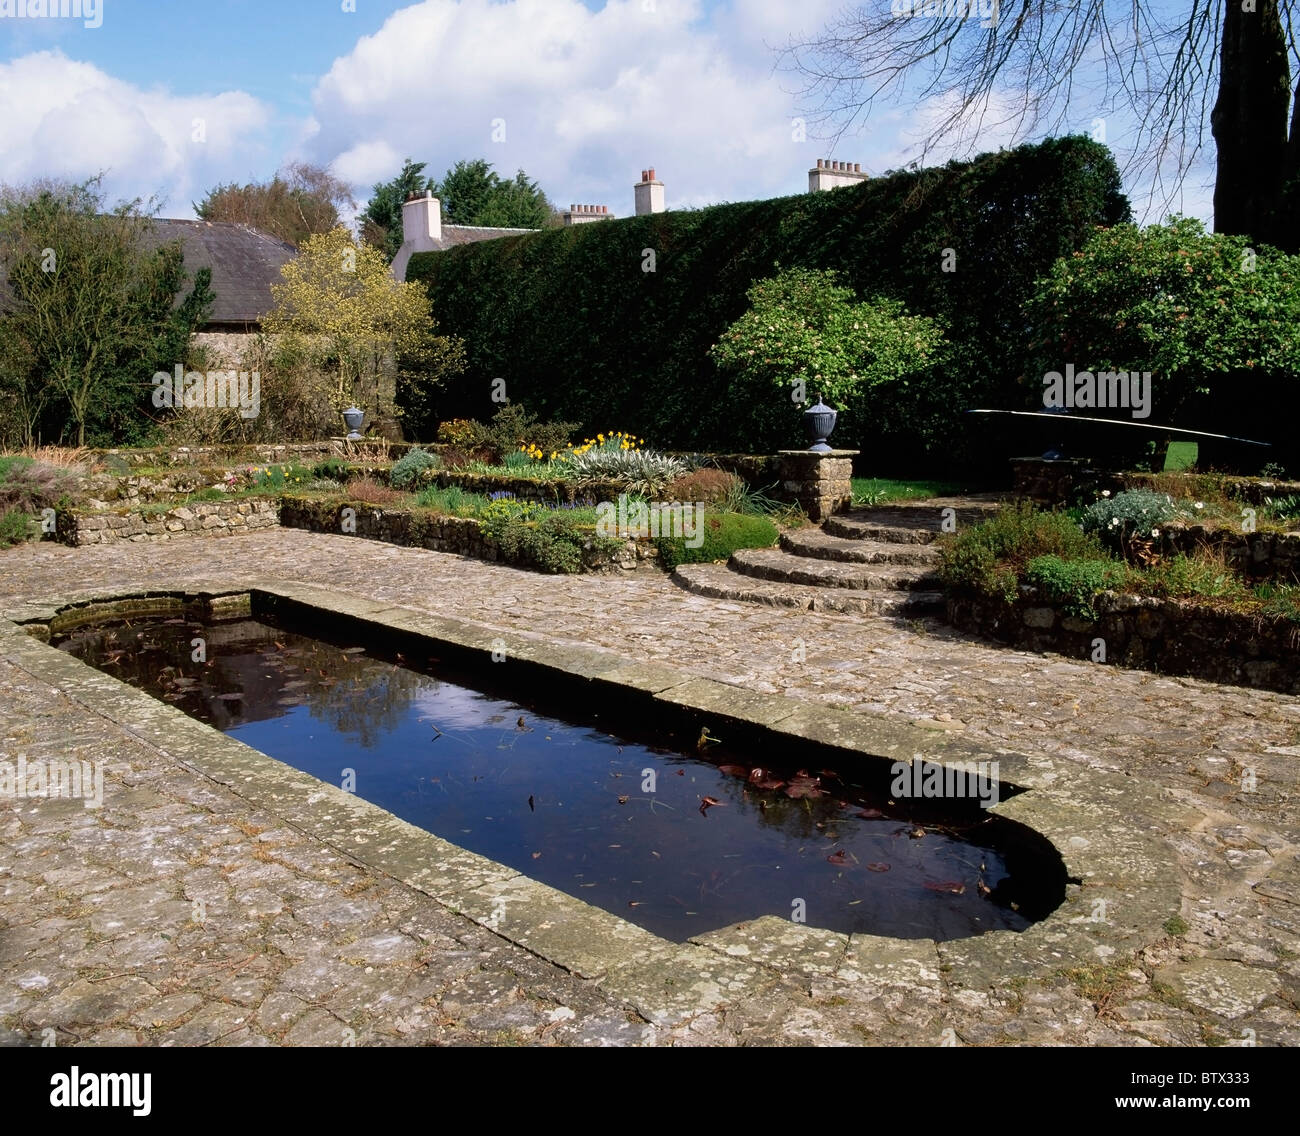 Ardsallagh House, Co Tipperary, Ireland; Sunken Garden And Lily Pond Stock Photo: 32535303 - Alamy on Garden Design Tipperary
 id=61204